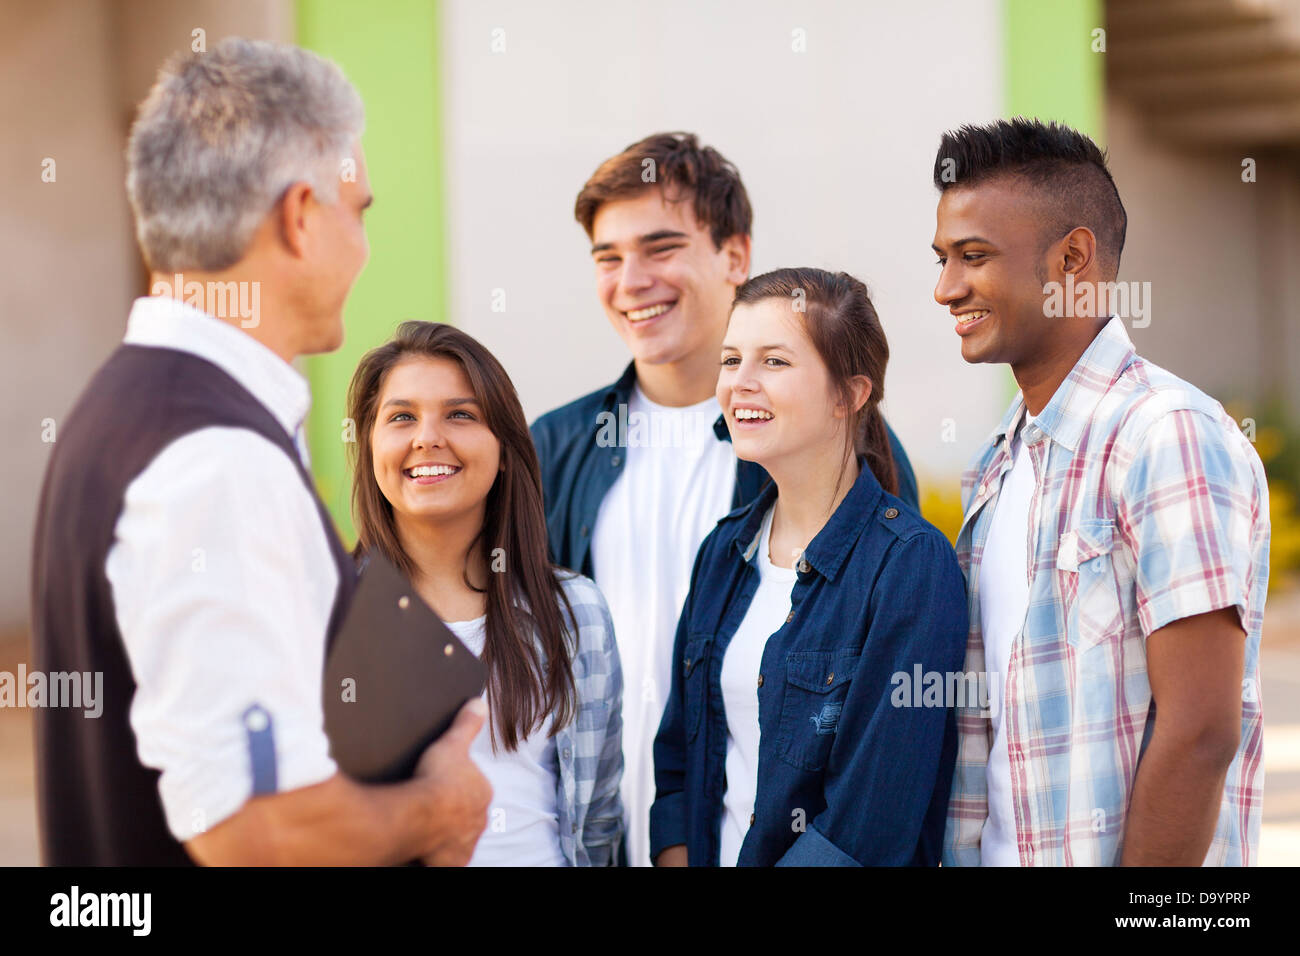 middle aged high school teacher talking to students during break Stock Photo